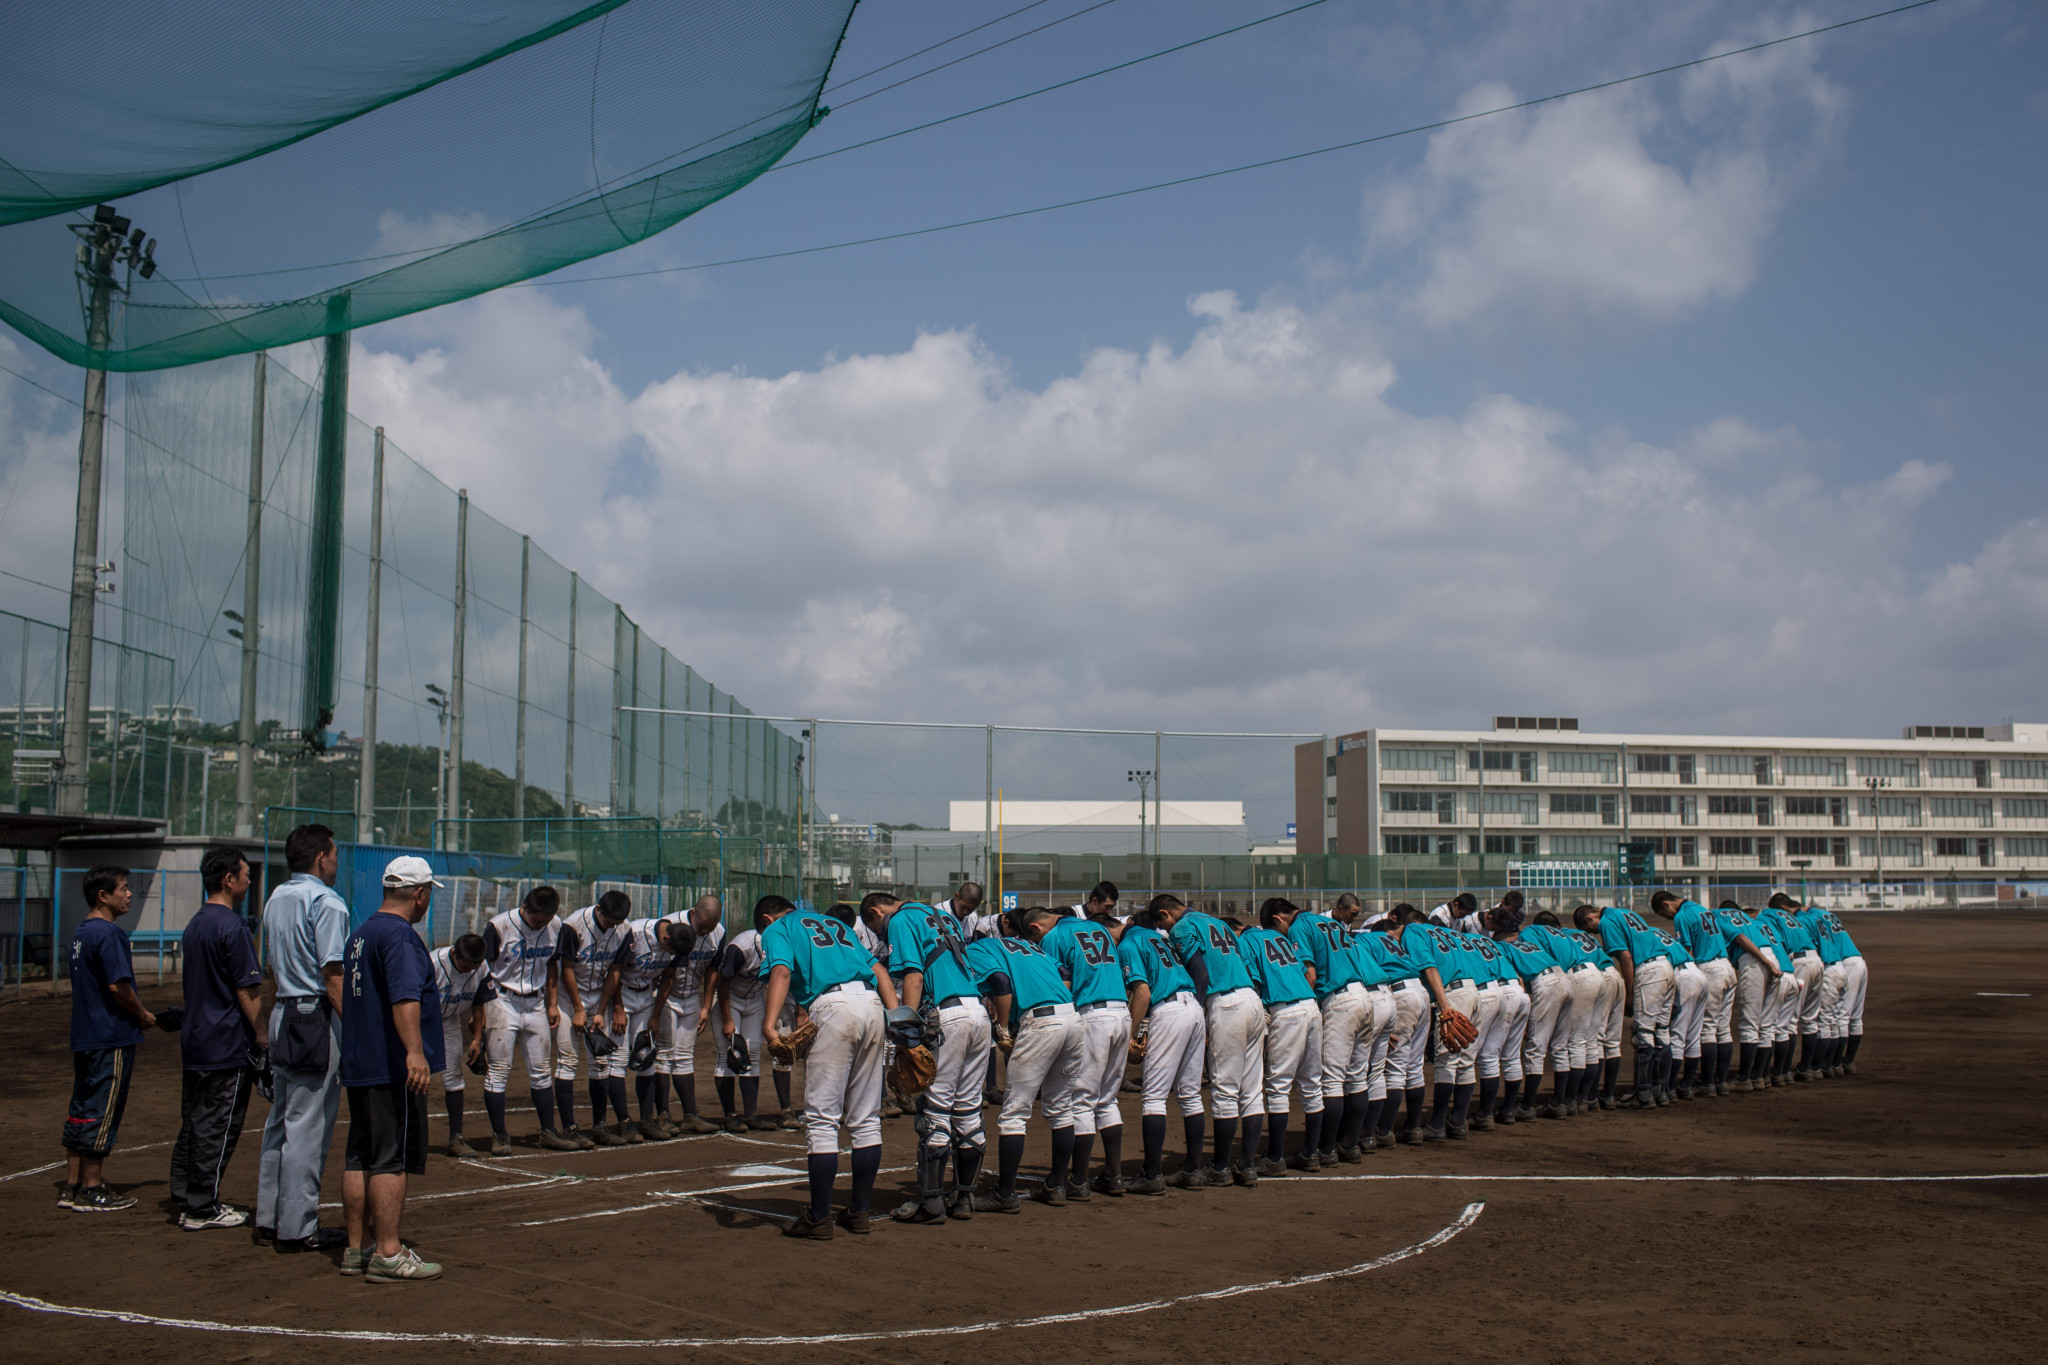 The National High School Baseball Championships is among Japan's biggest annual sporting events ©Getty Images